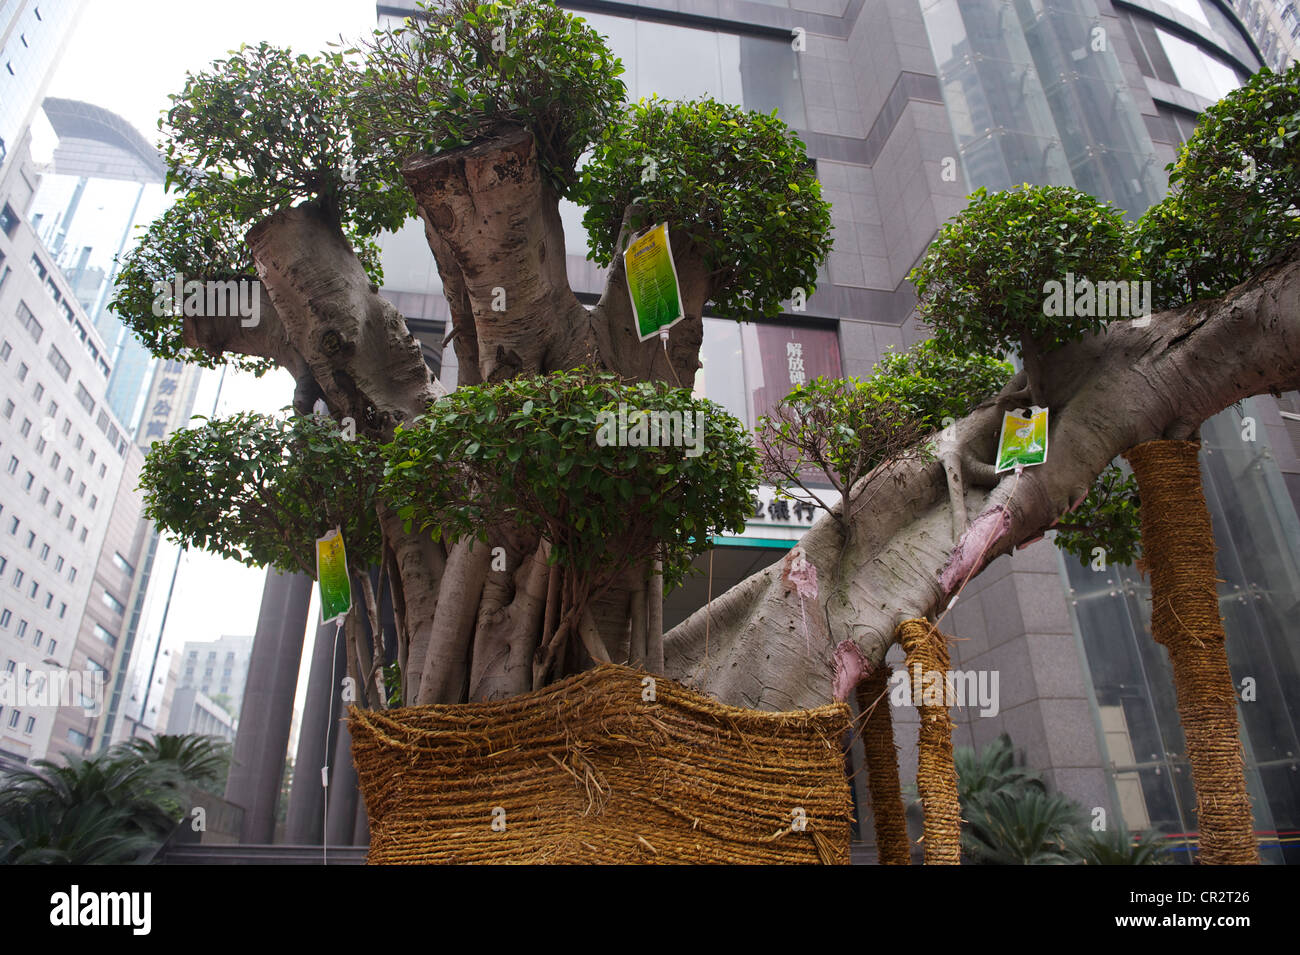 An old tree is being injected with nutrient fluid after being moved from countryside to Chongqing, China. 2011 Stock Photo